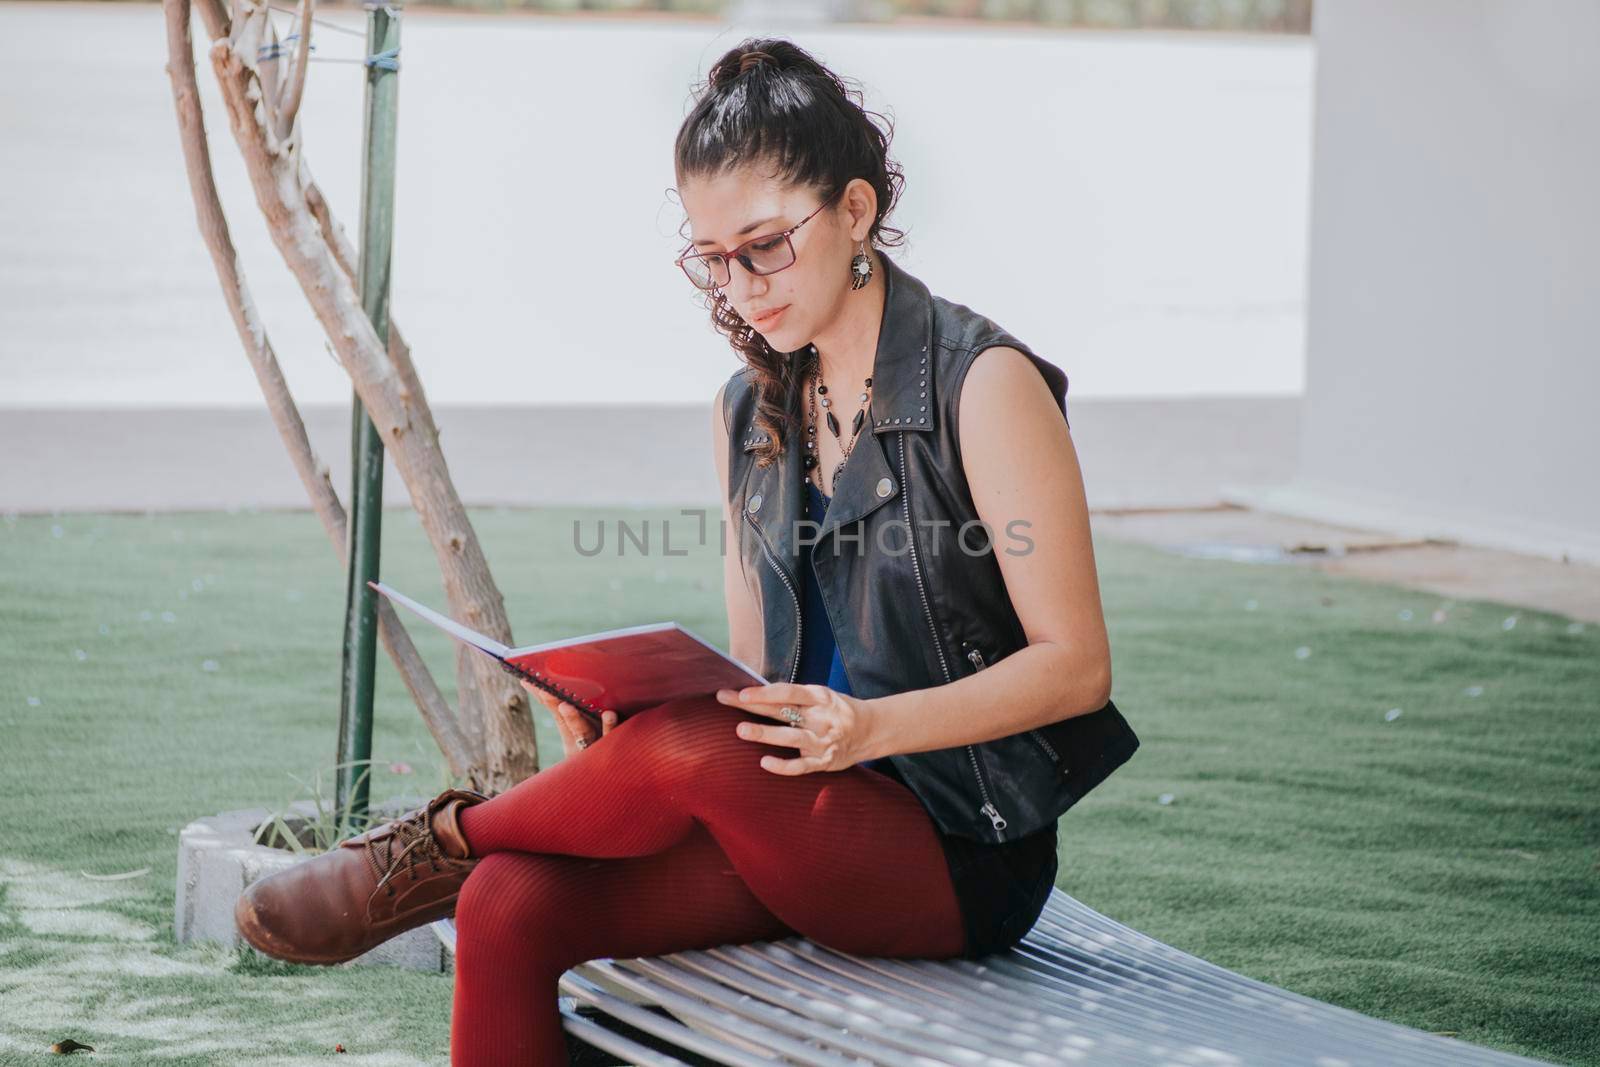 Urban girl sitting on a bench reading a book, Latin girl reading a book outside, concept of a student girl reading a book